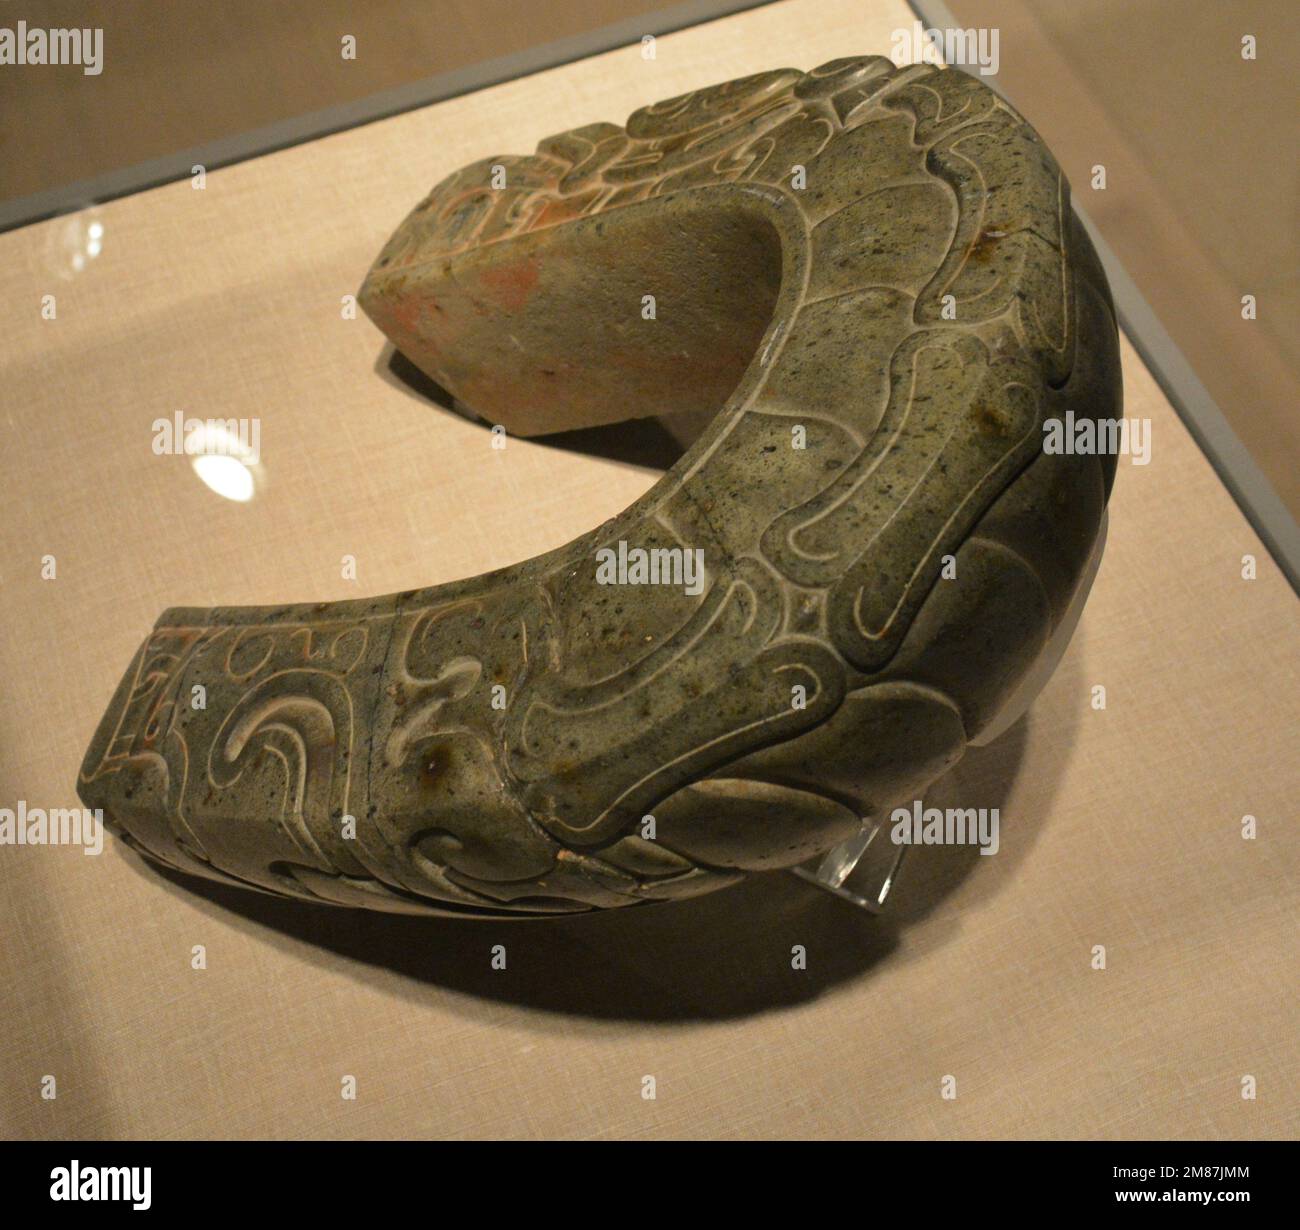 Yoke with images reptilian and skeleton Precolumbian art in the Dallas Museum of Art, Dallas Texas Stock Photo